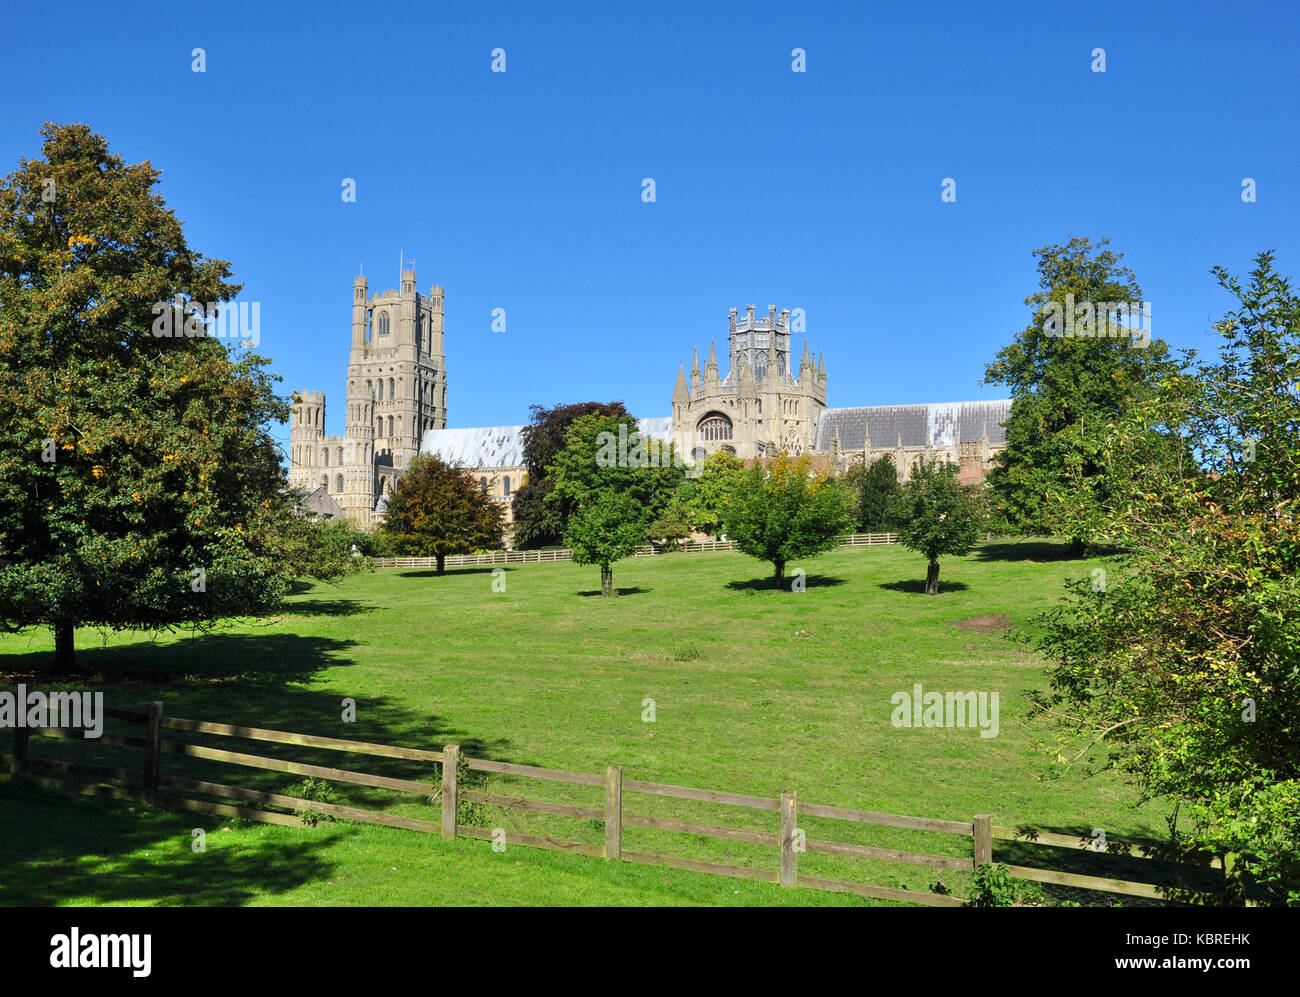 Ely Cathedral (viewed from the park), Cambridgeshire, England, UK Stock Photo